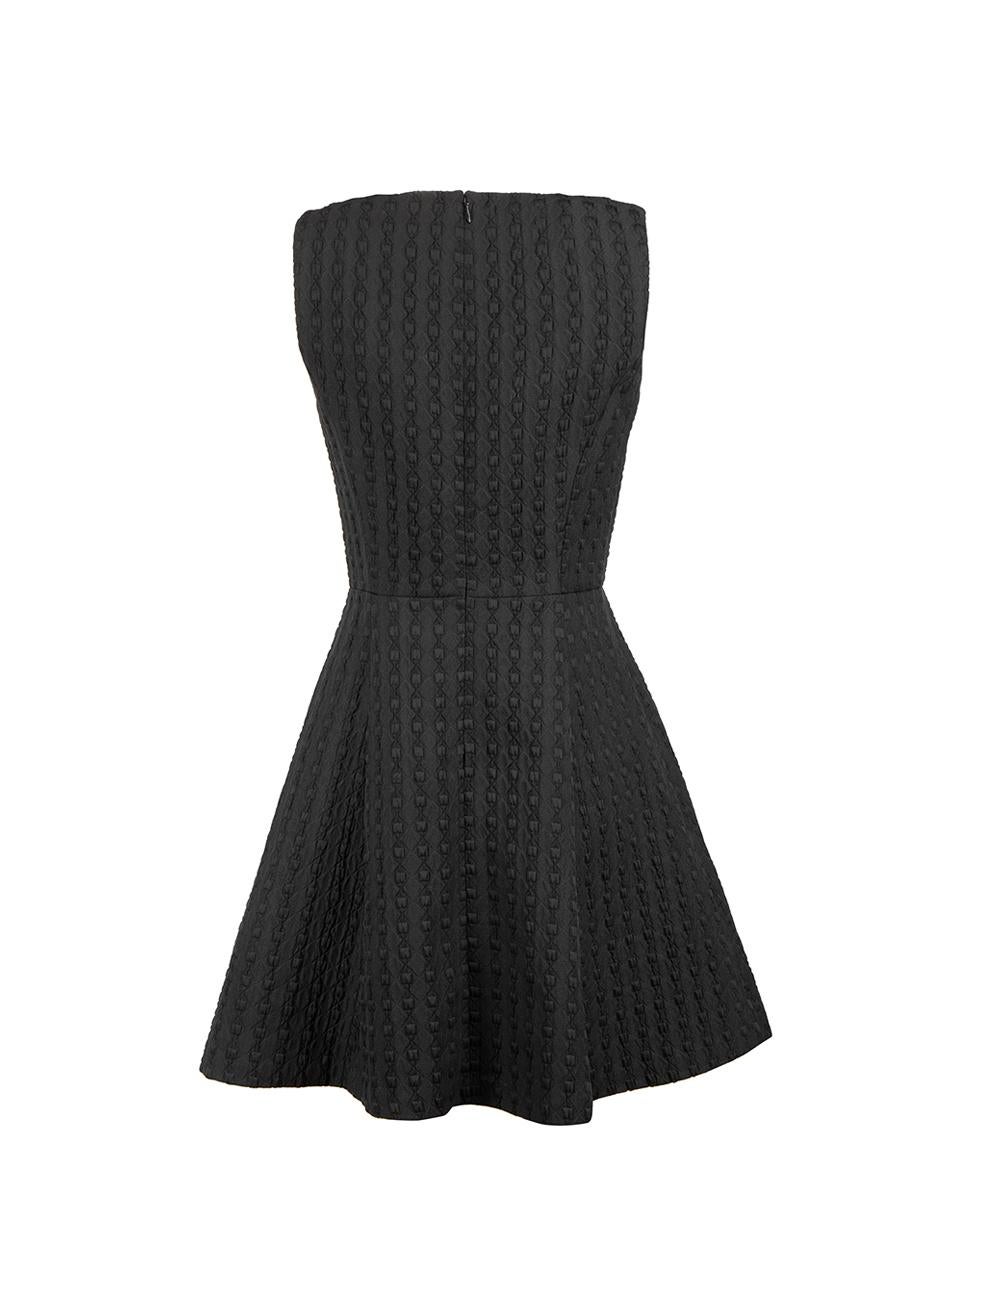 Theory Black Textured Sleeveless Dress Size S In Good Condition For Sale In London, GB